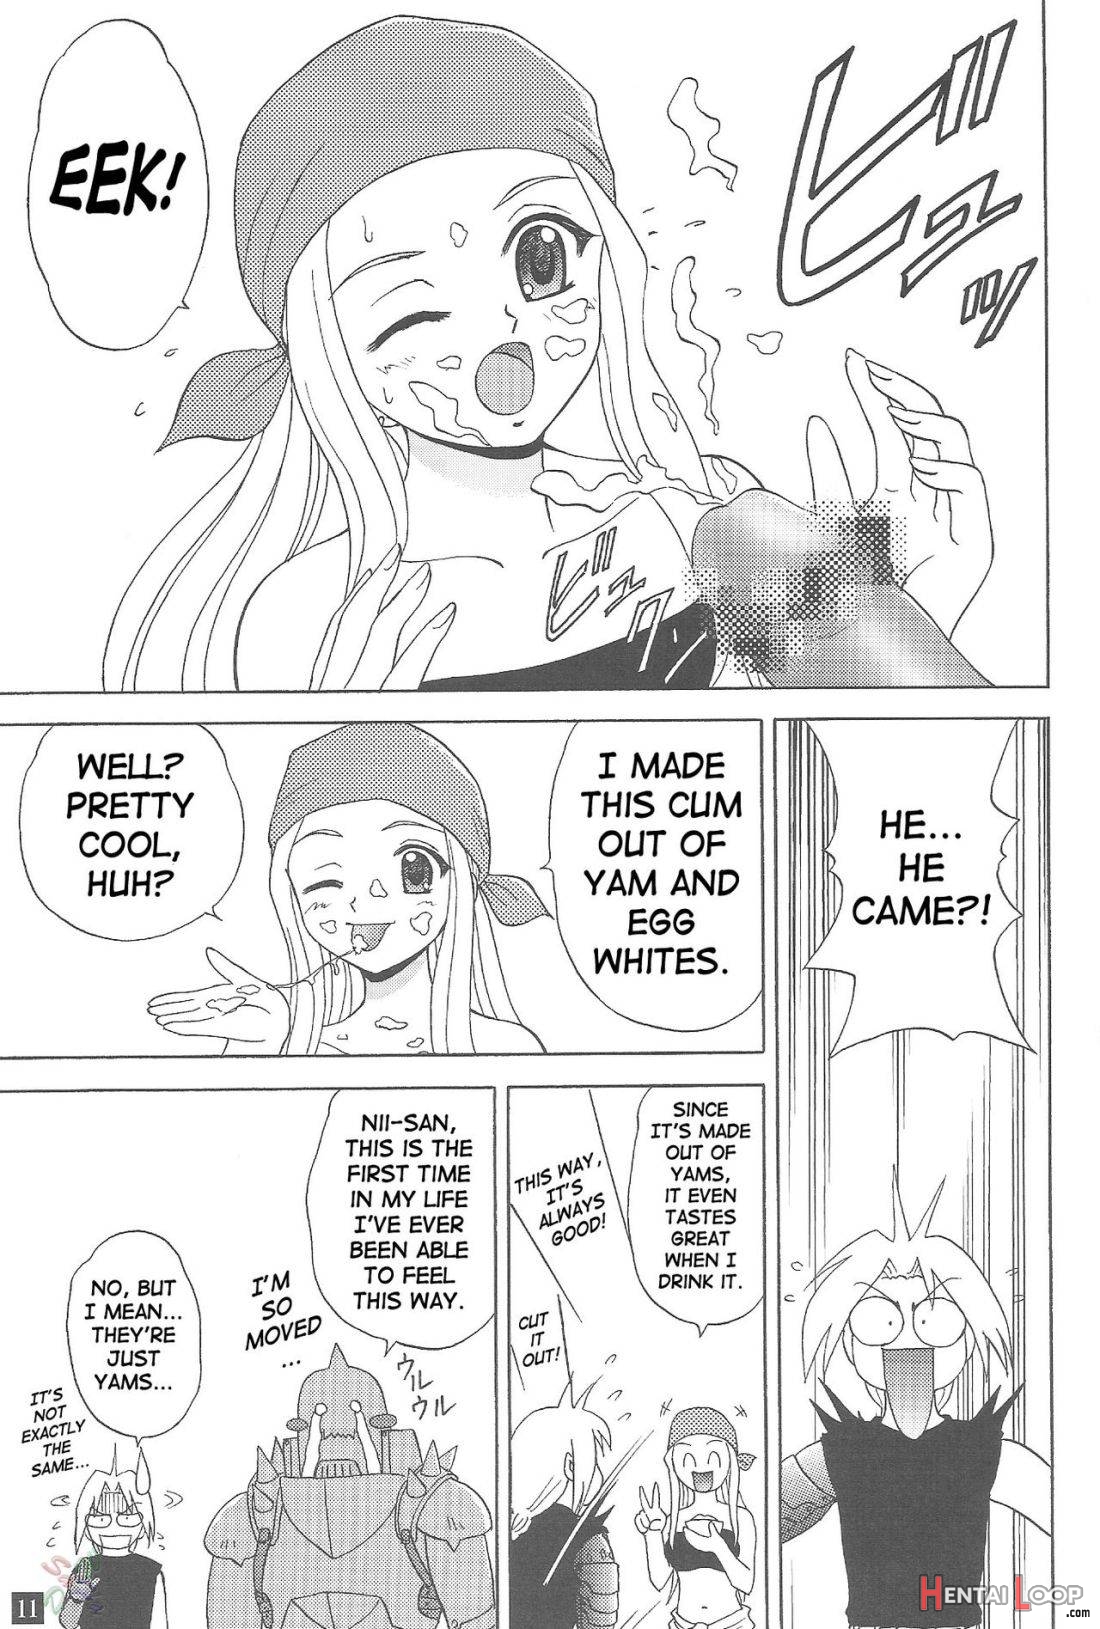 Winry No Win’win page 10